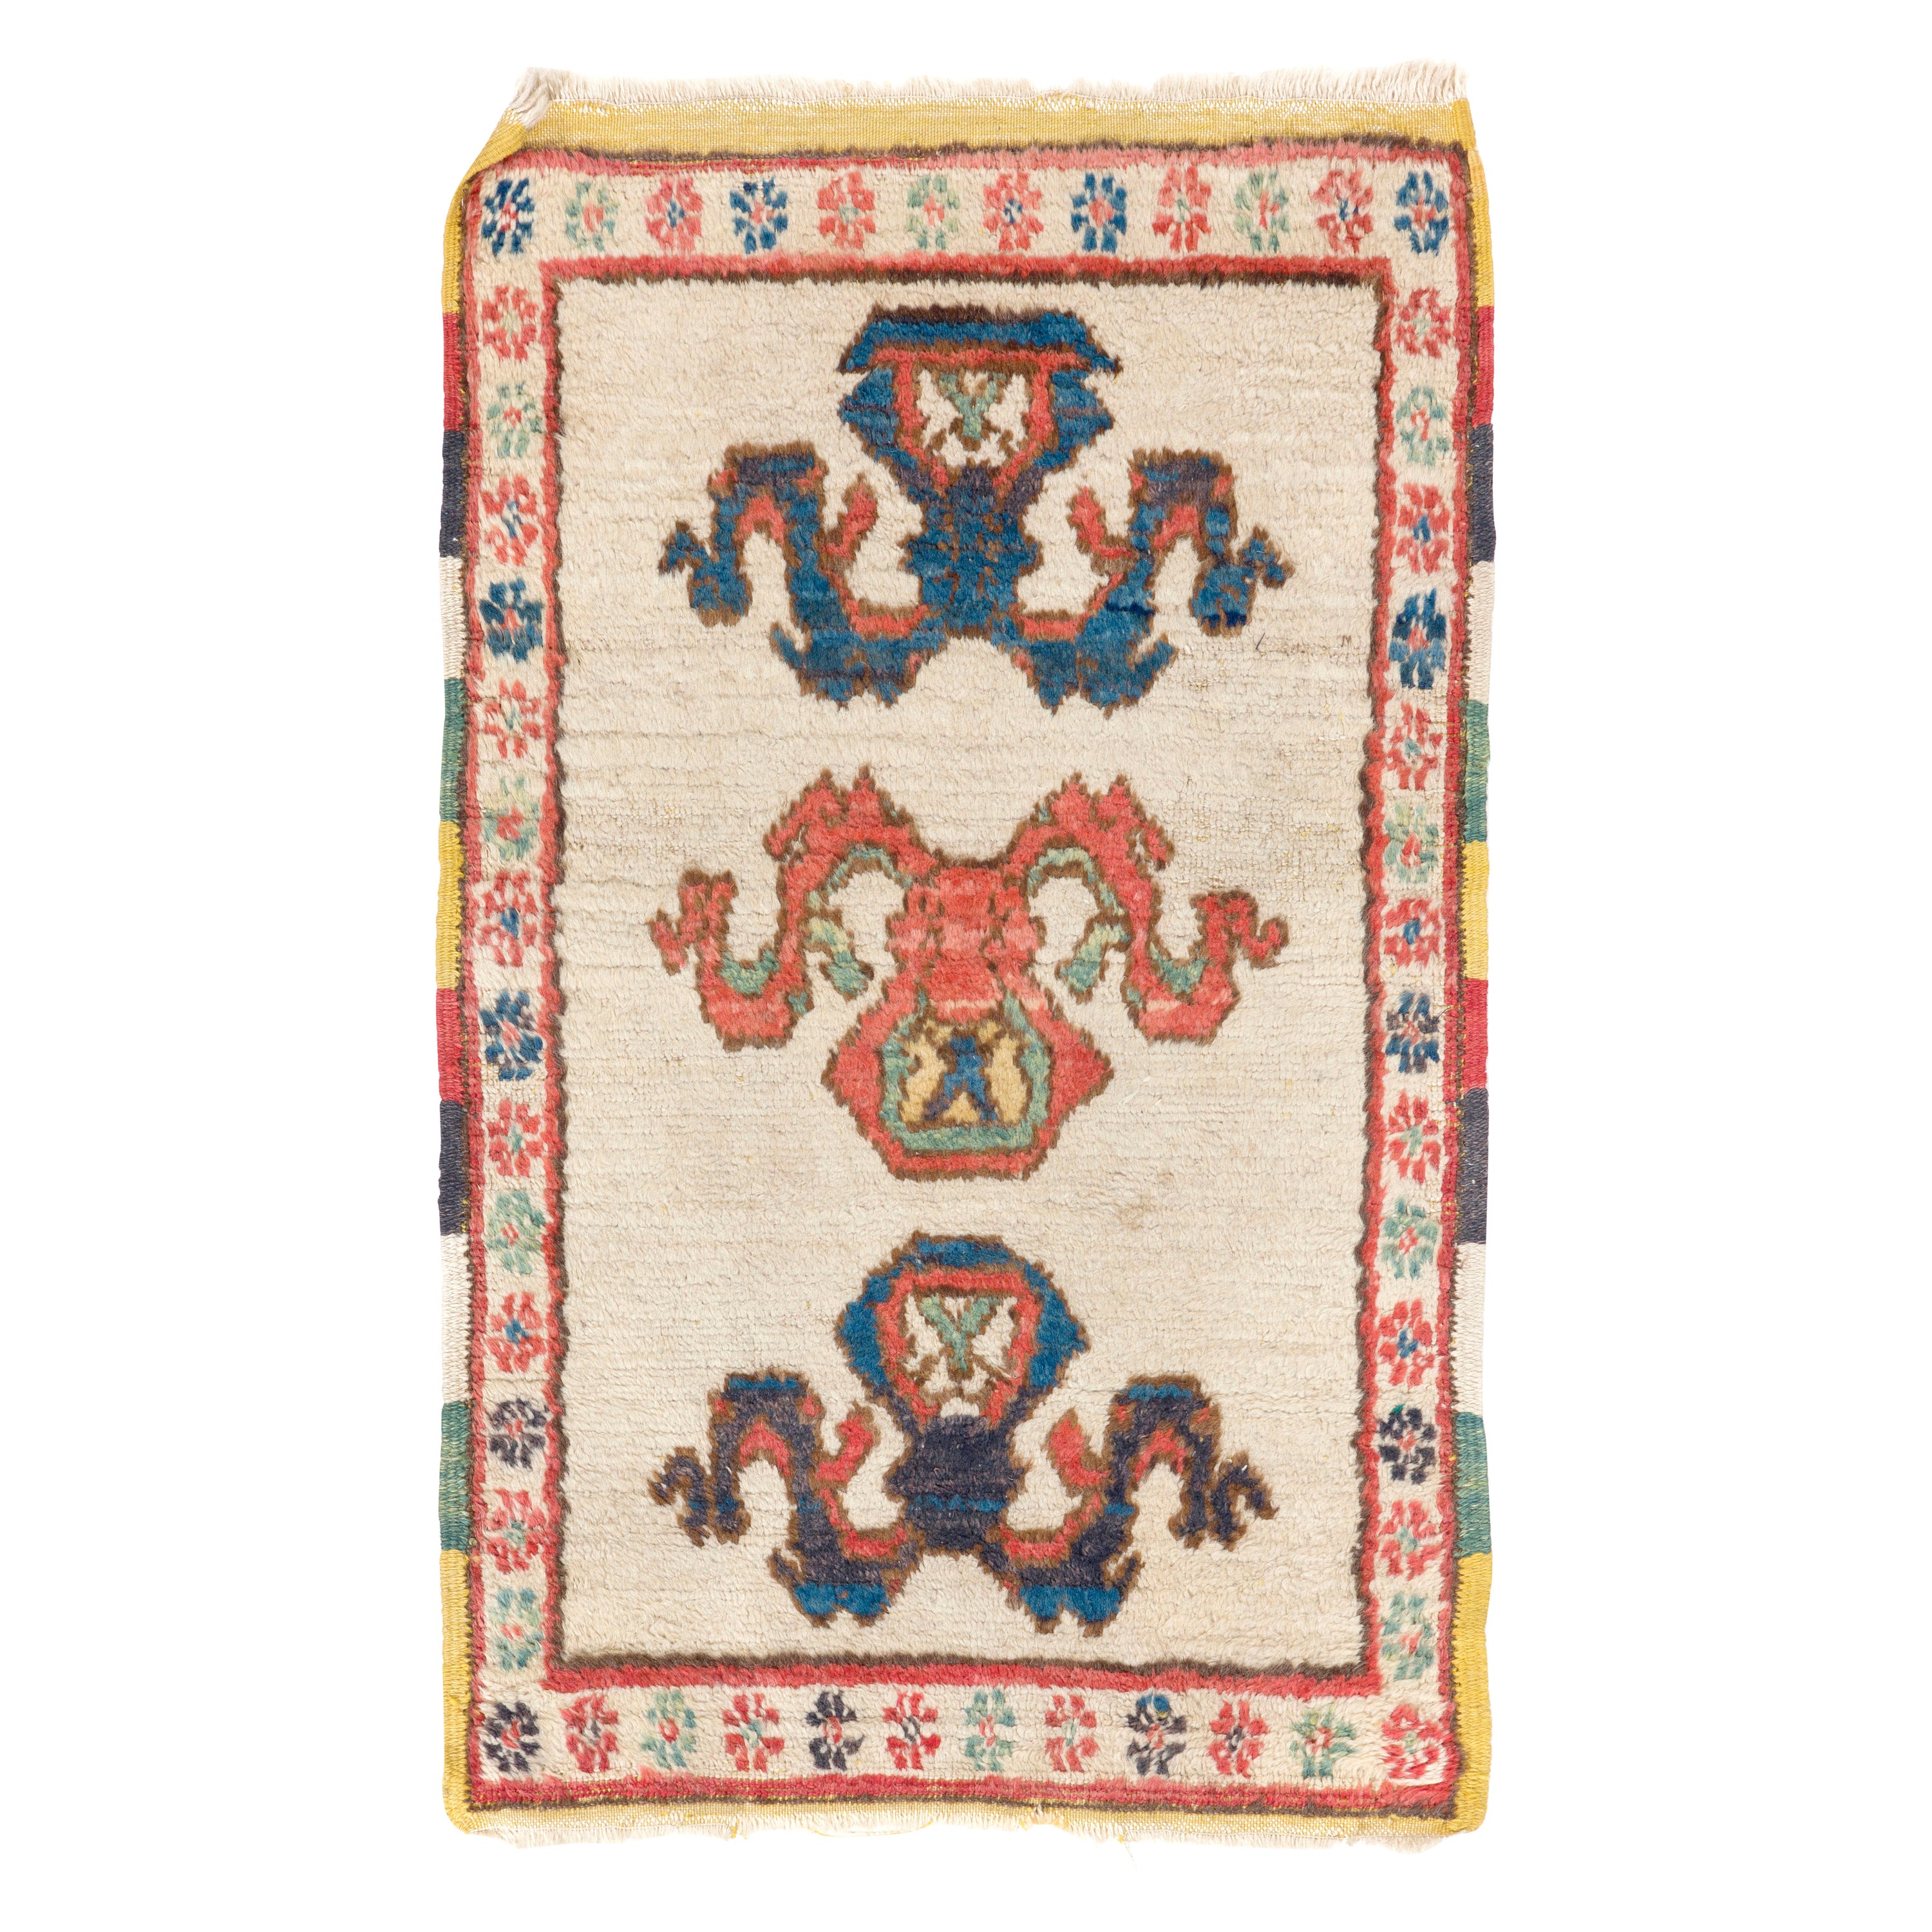 25x38 in Semi Antique Rug with Colorful Border. Seat Cover or Door Mat. All Wool For Sale